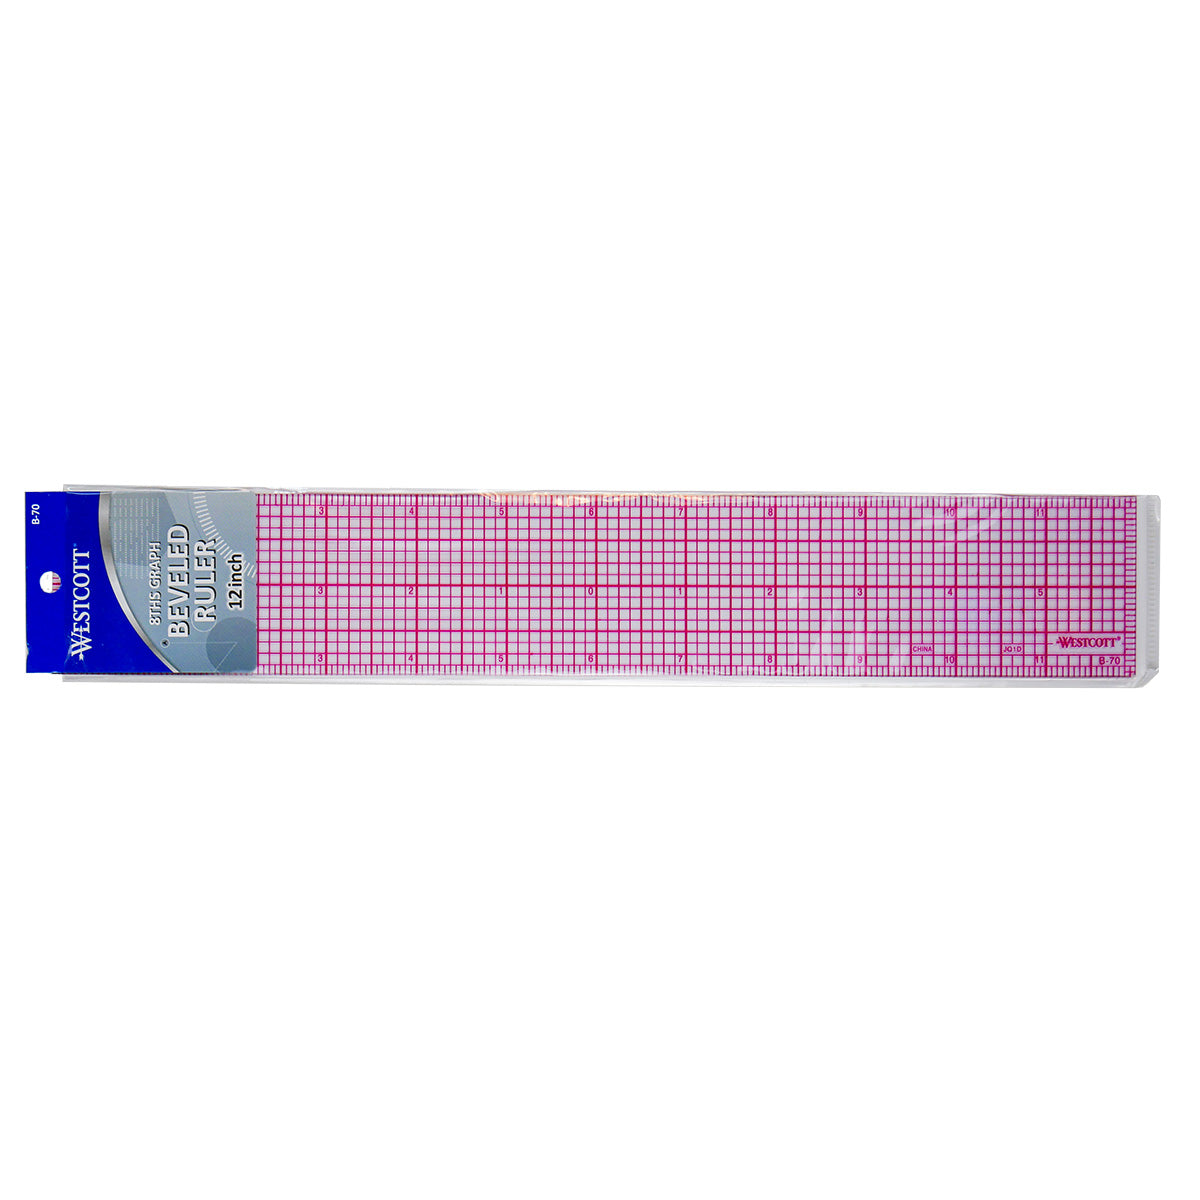 Sideways view of Westcott Beveled Ruler, 12" in length using 8ths graph. It has a transparent base with red grid overlay.